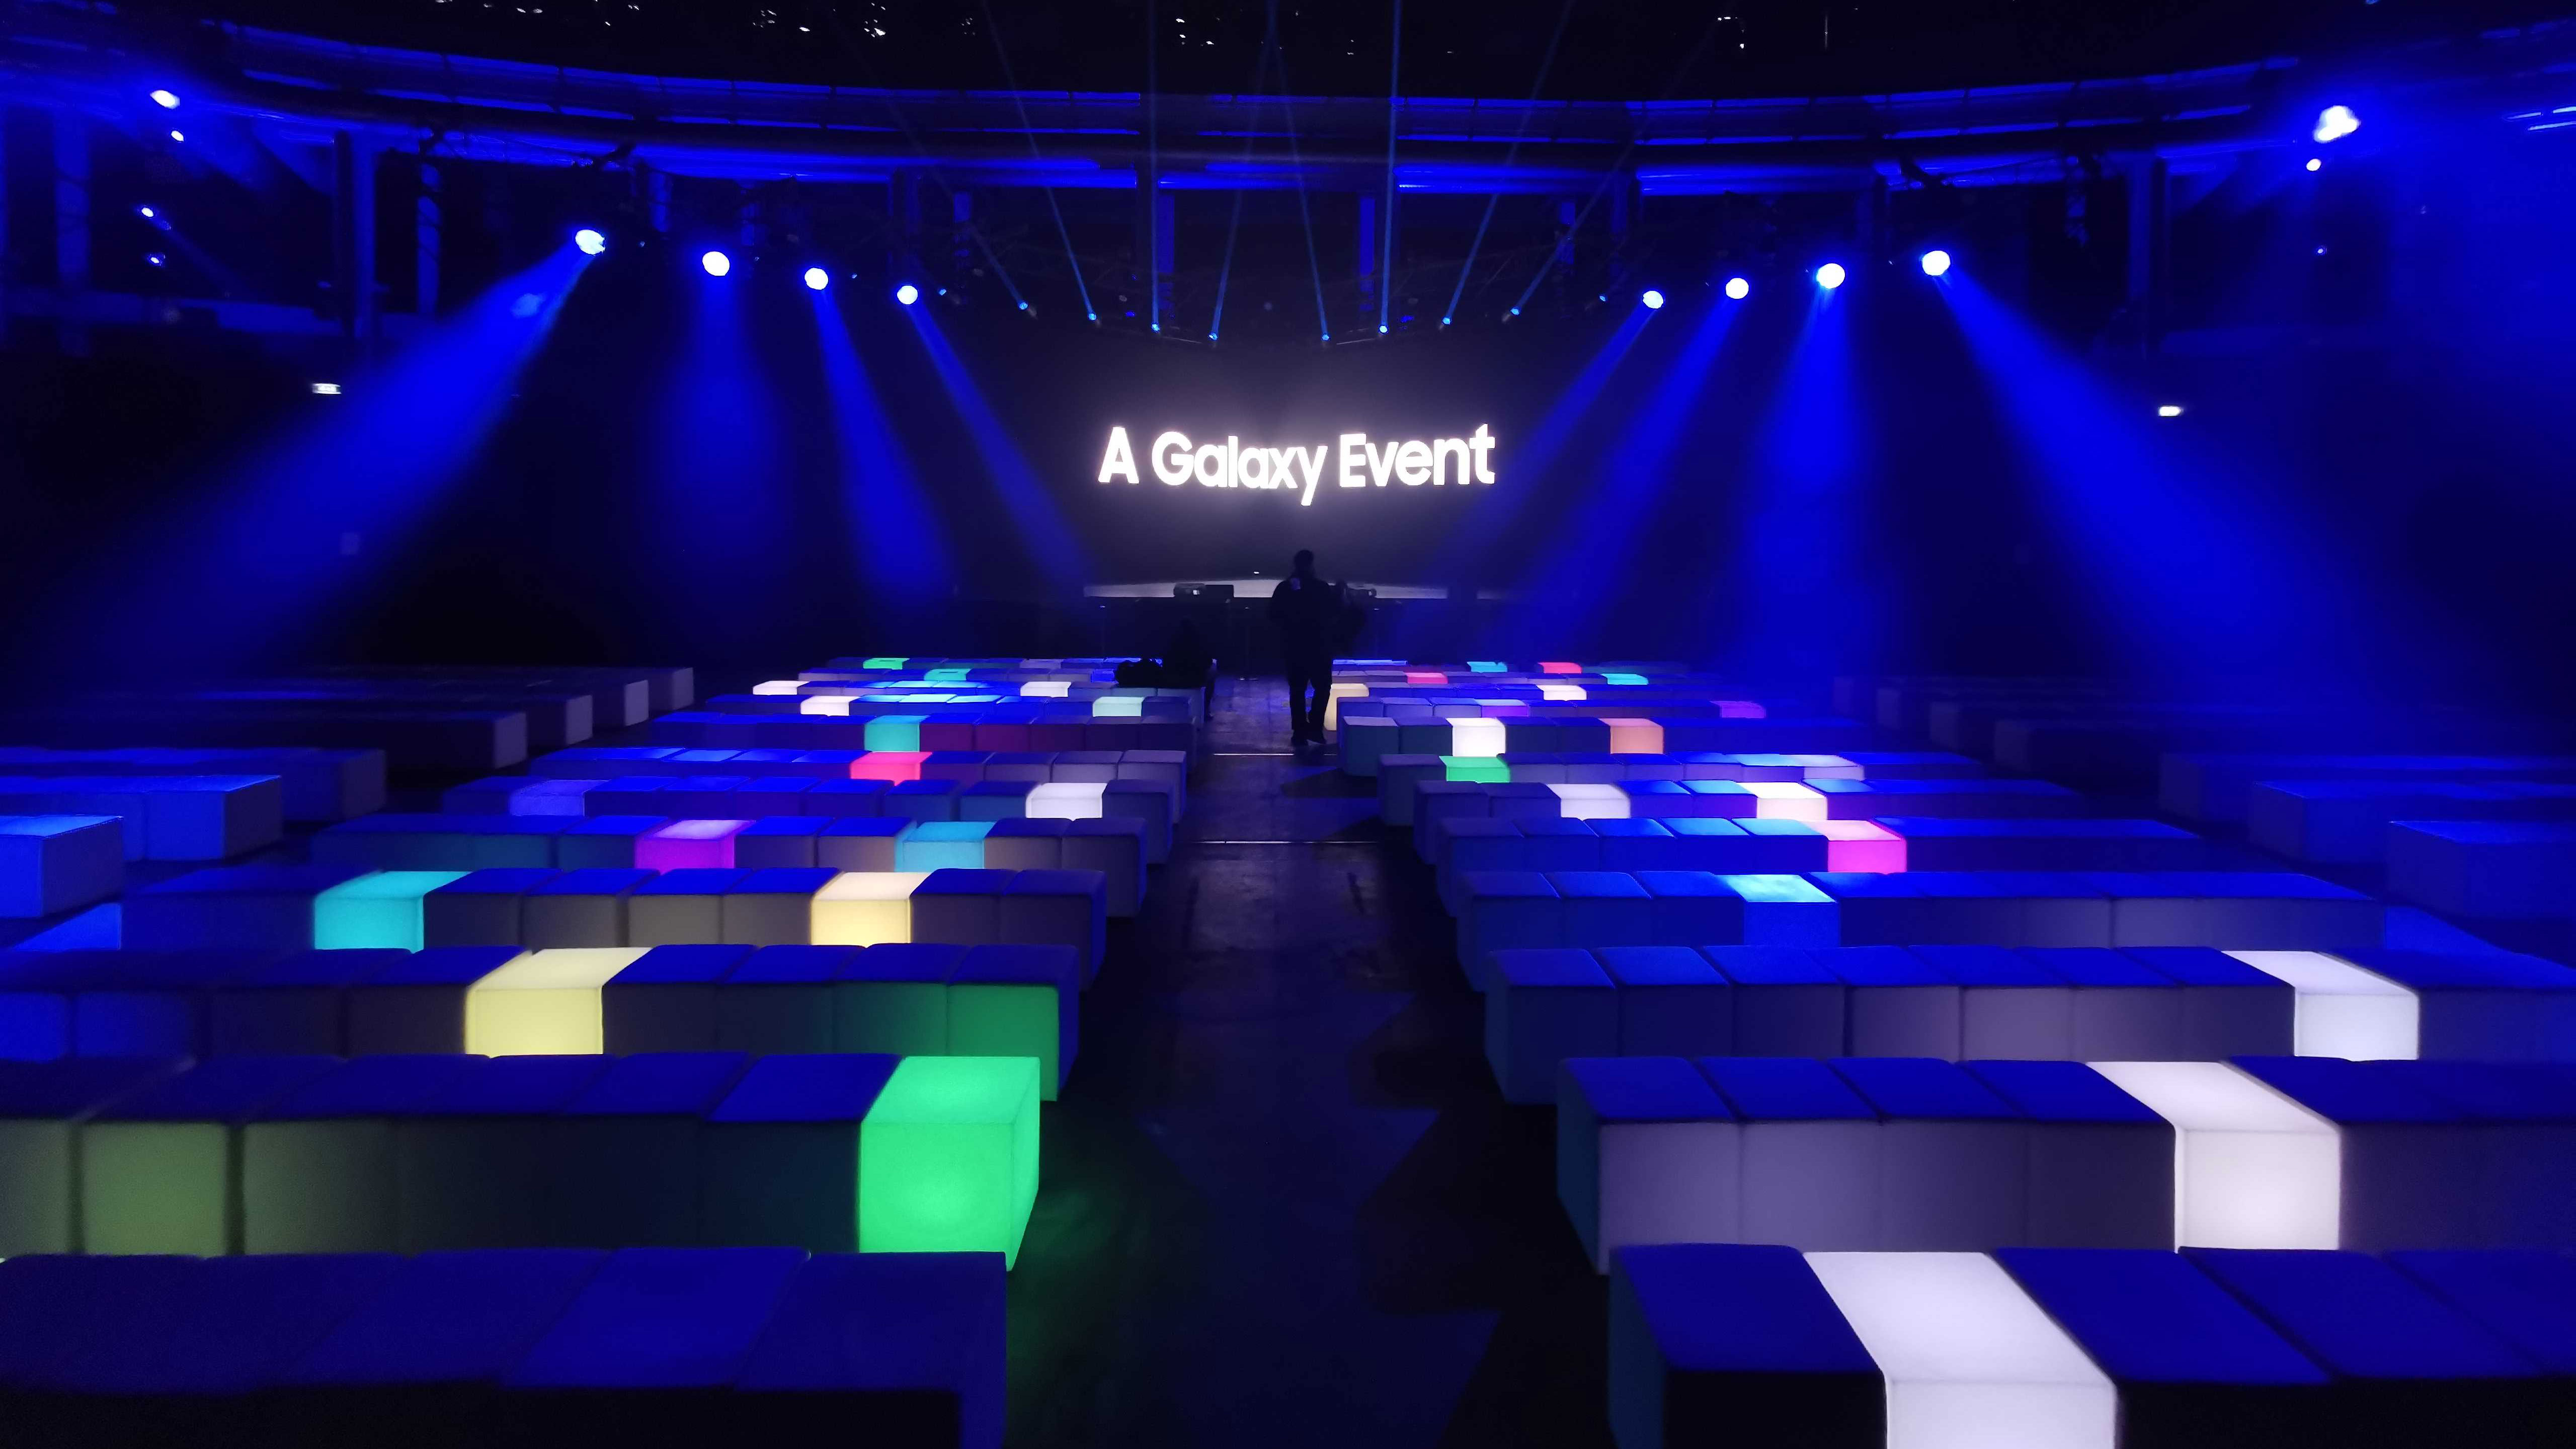 Samsung Galaxy event live blog everything that happened at the launch